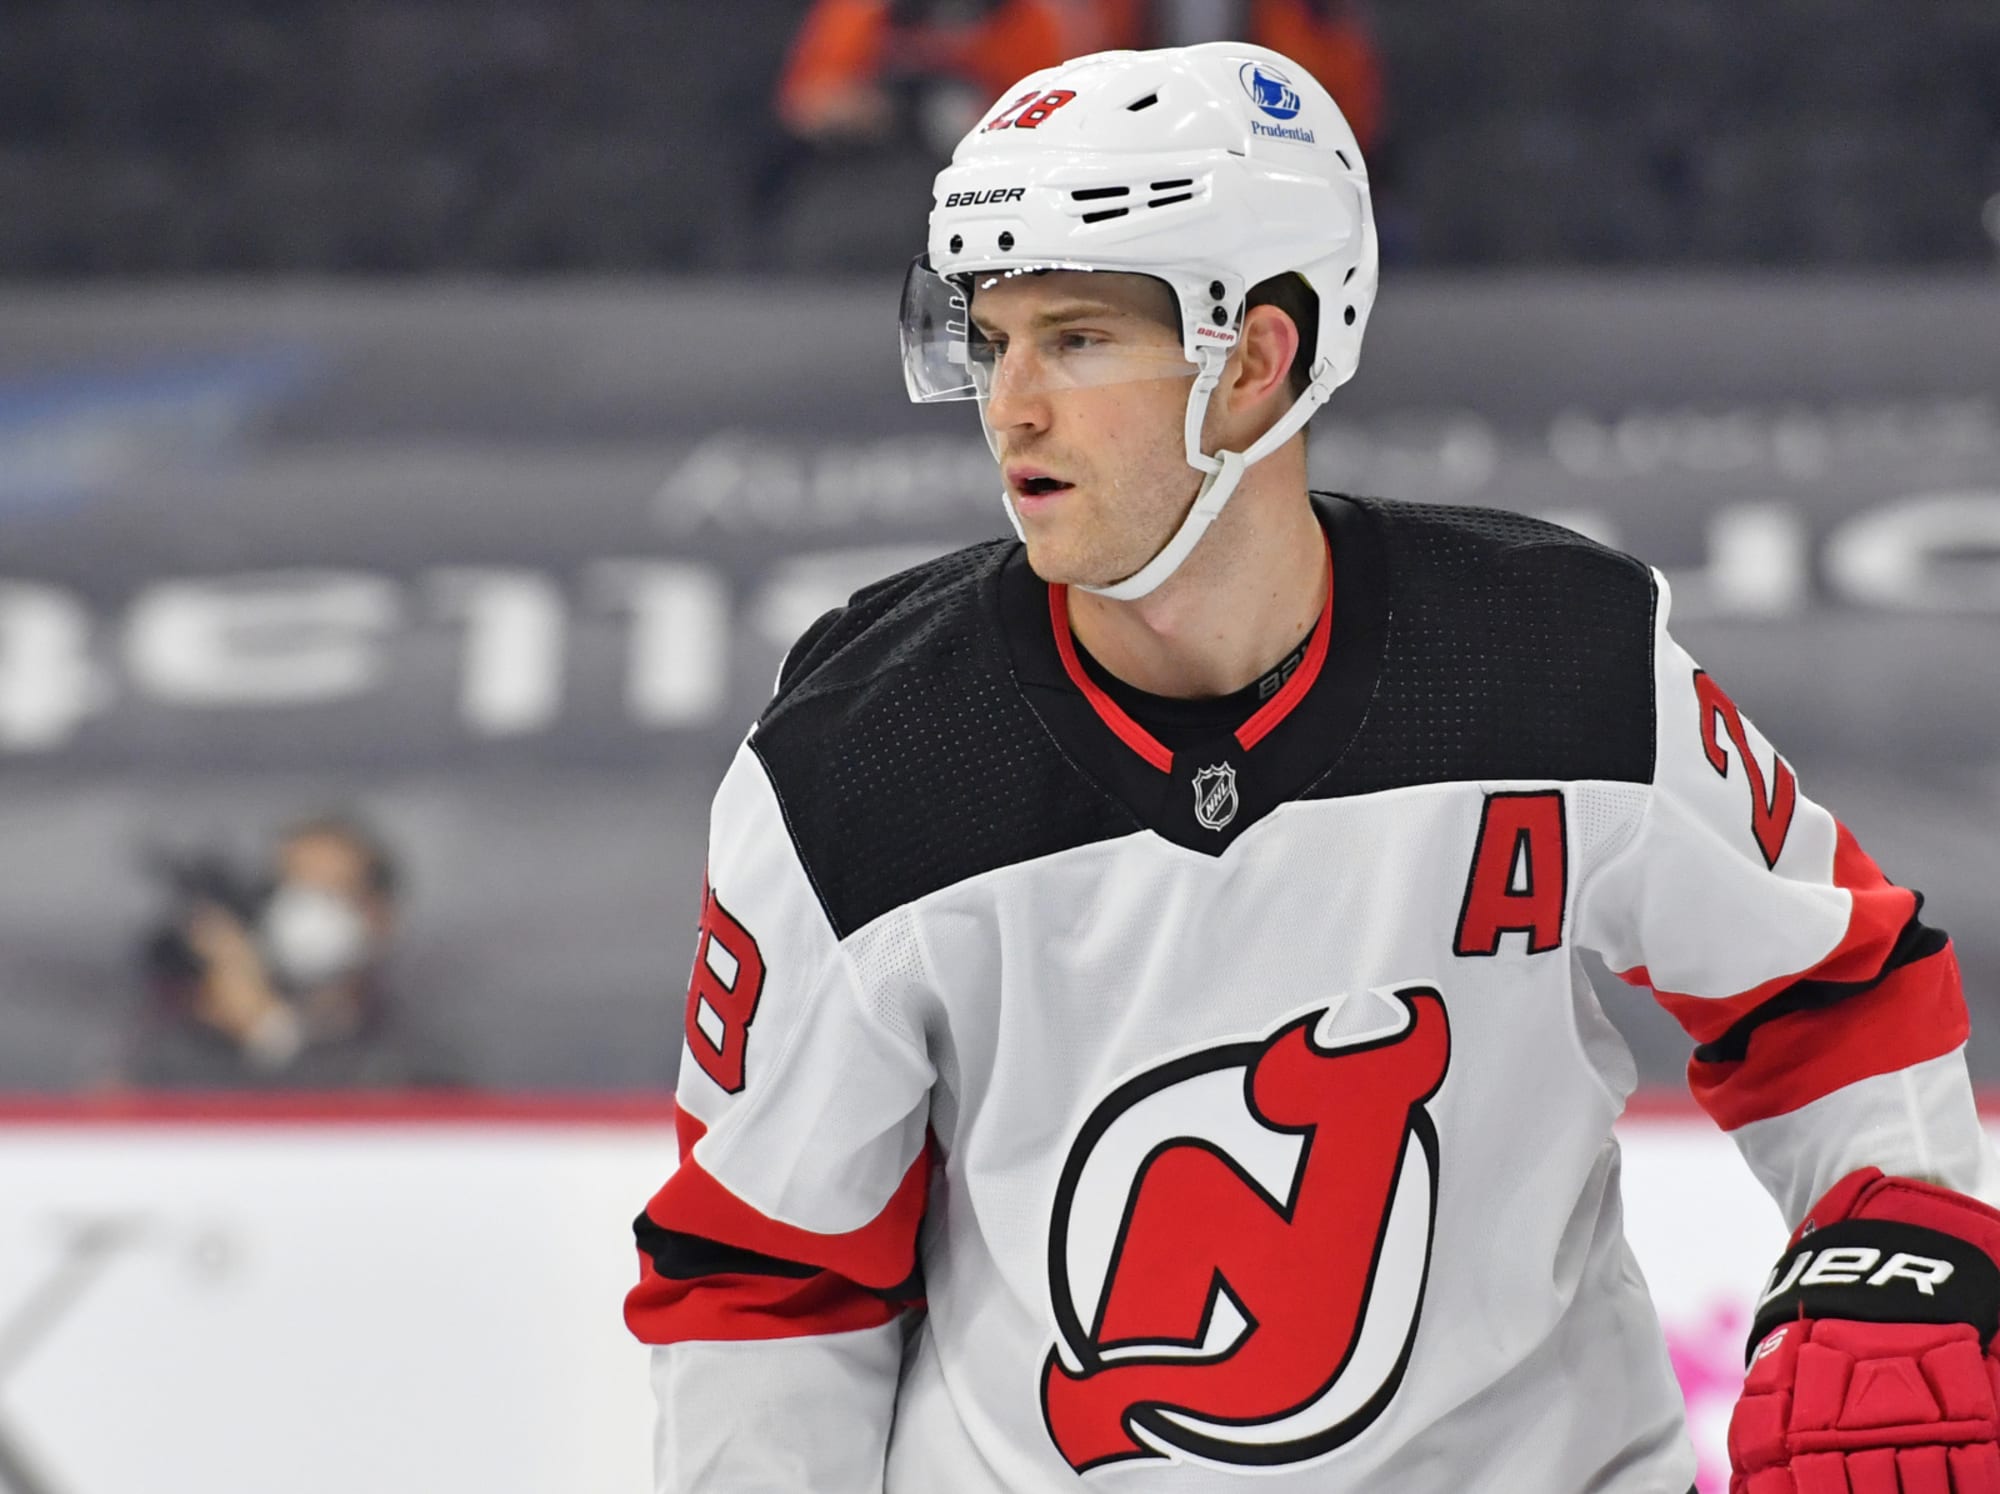 New Jersey Devils: Severson Wants to Stay After Career Season